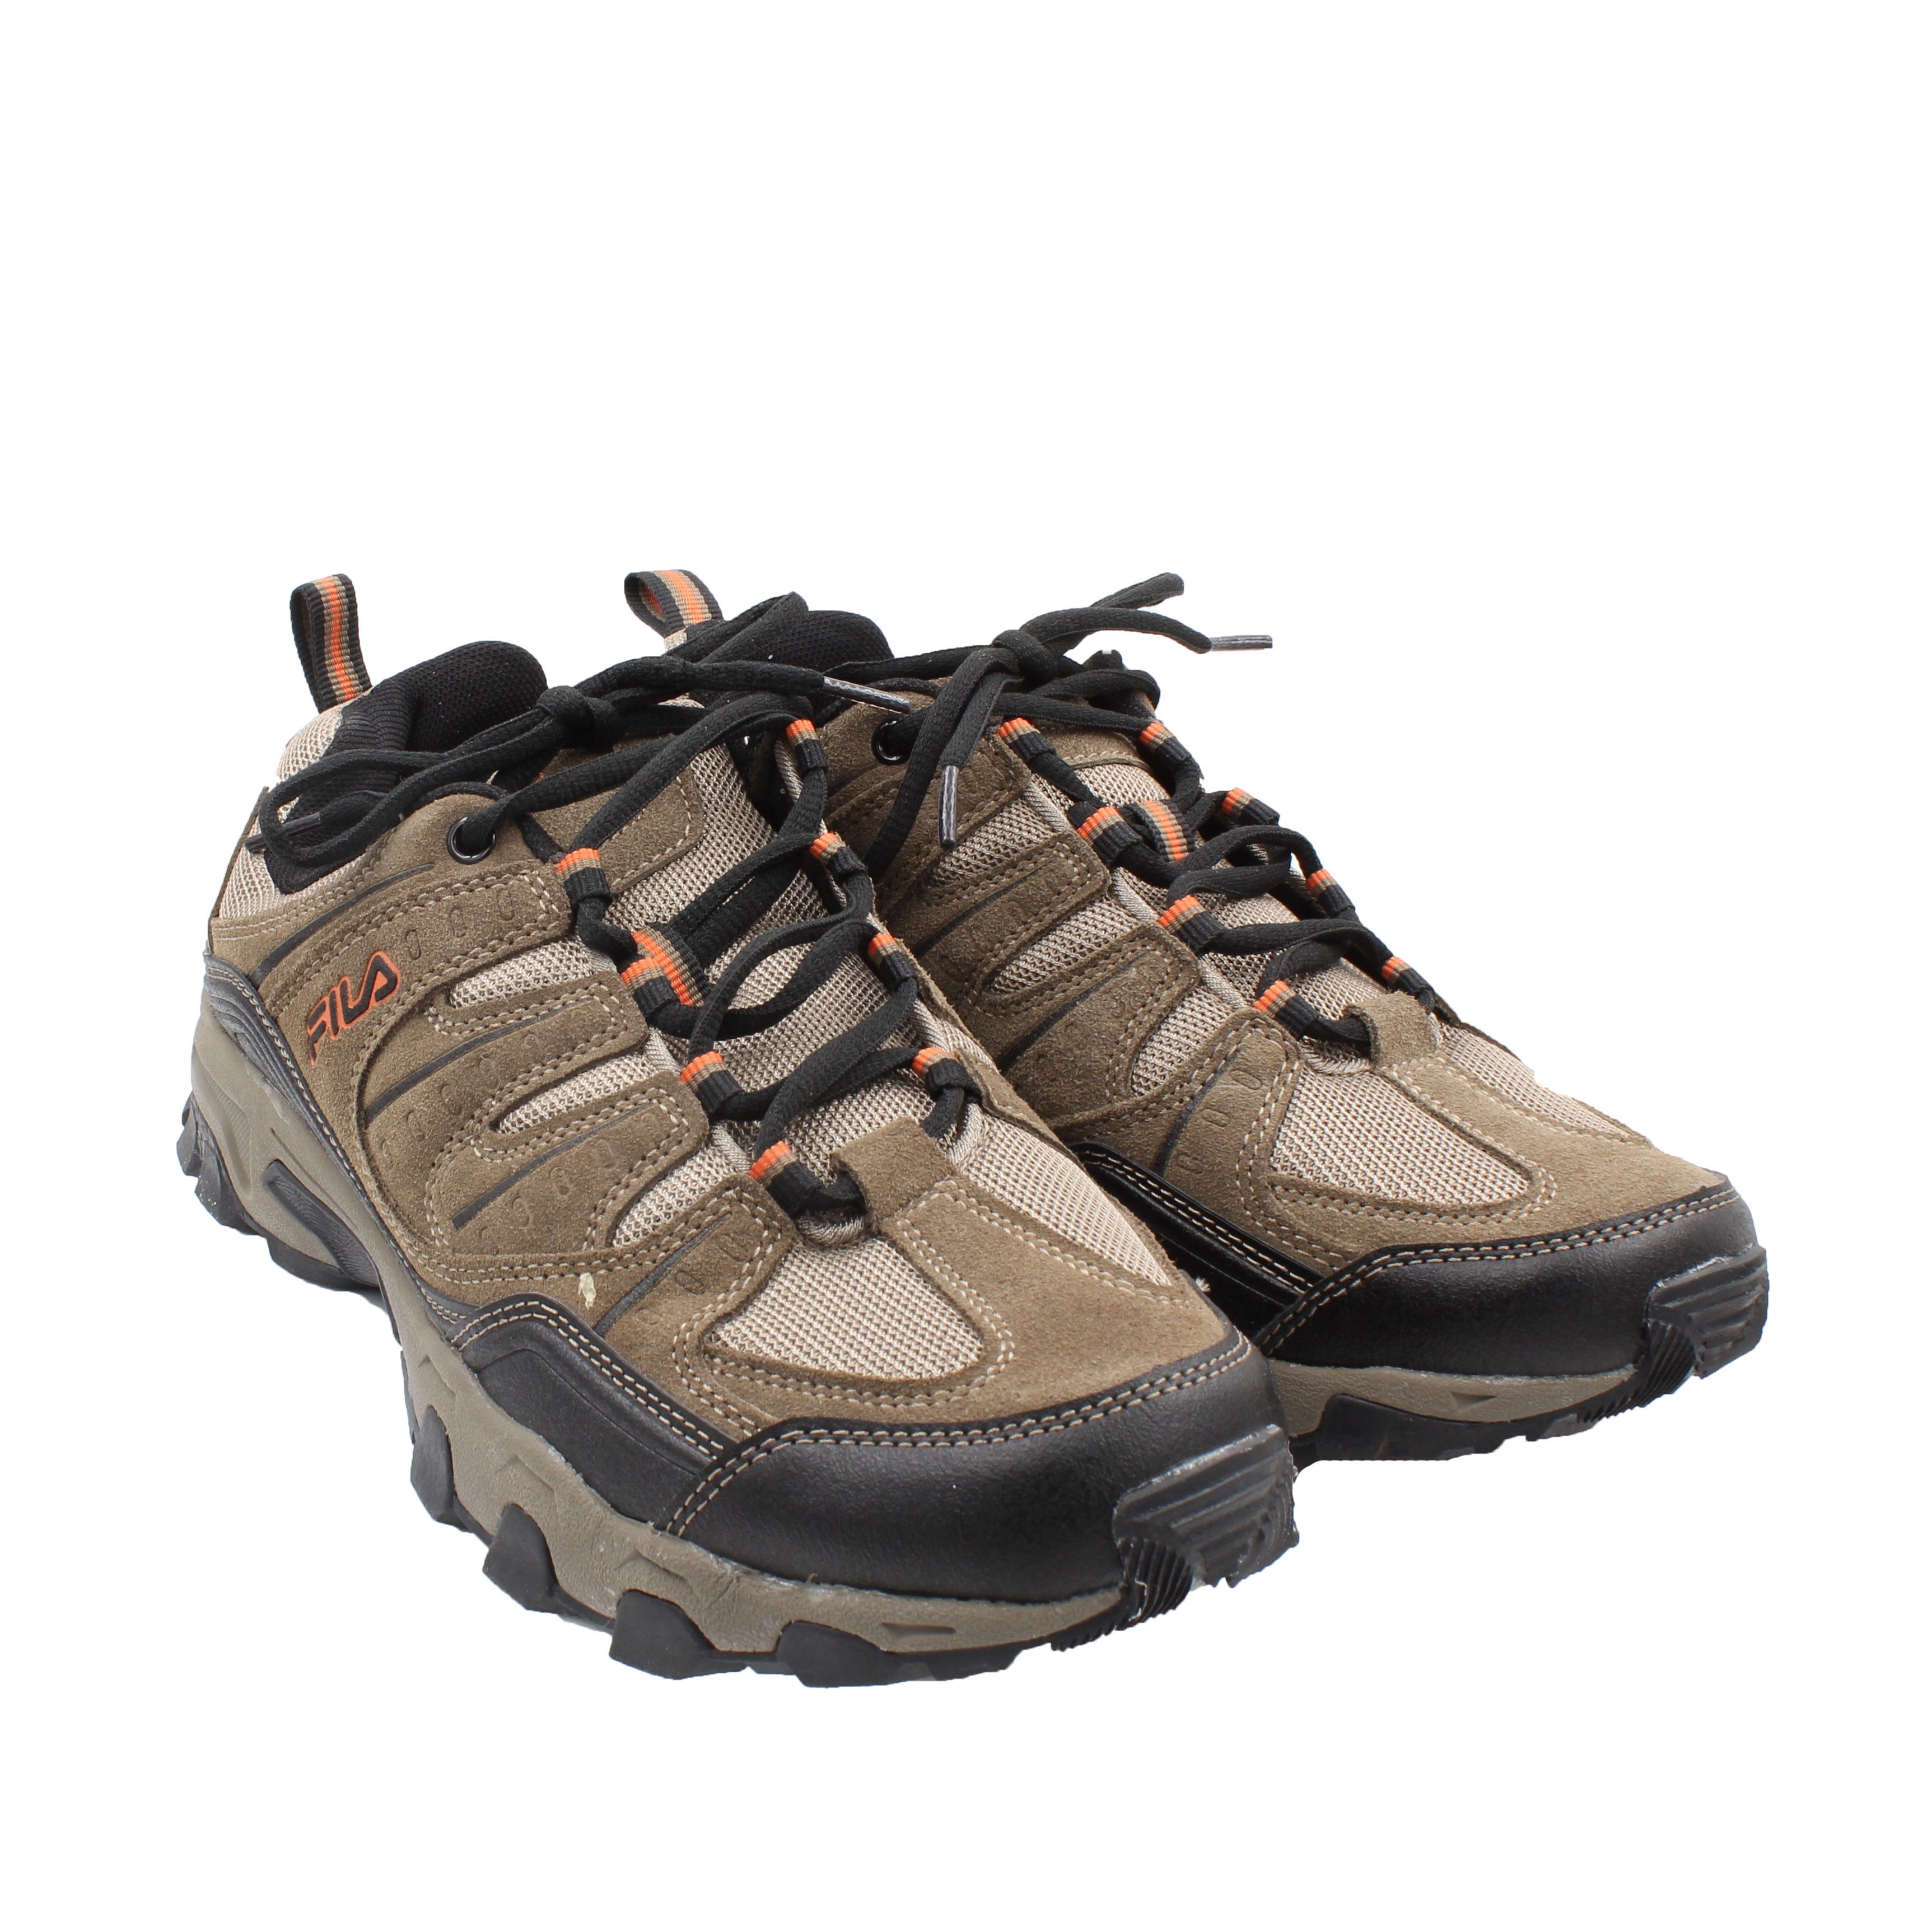 Men's Outdoor Hiking Trail Athletic Shoes - Walmart.com